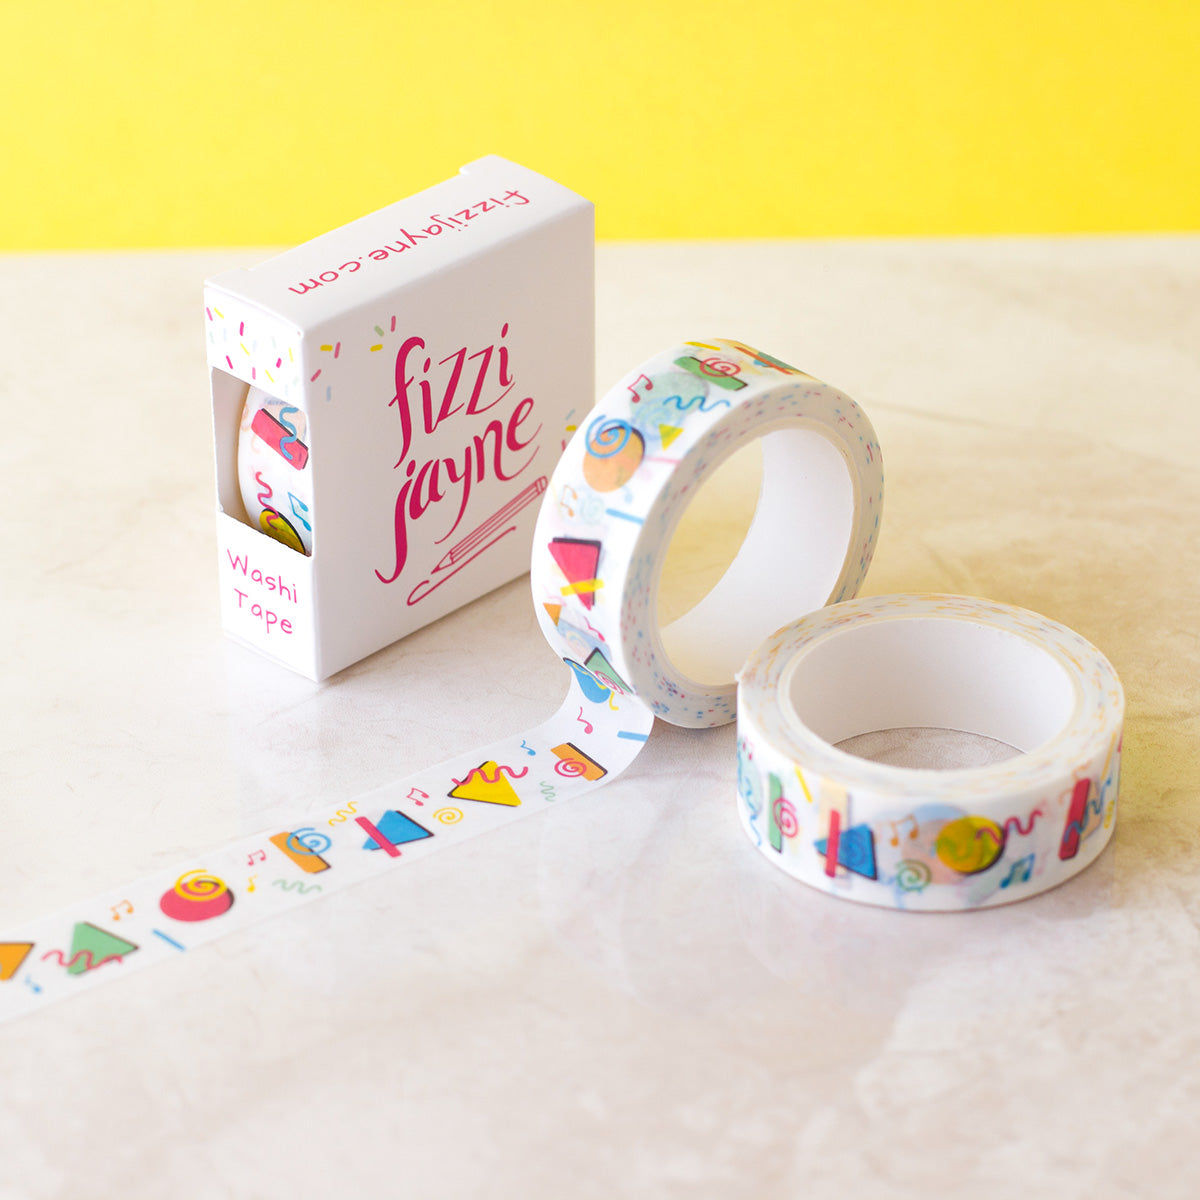 Colourful Washi Tape packaged in a box. Design is 90s inspired, Memphis style with musical notes